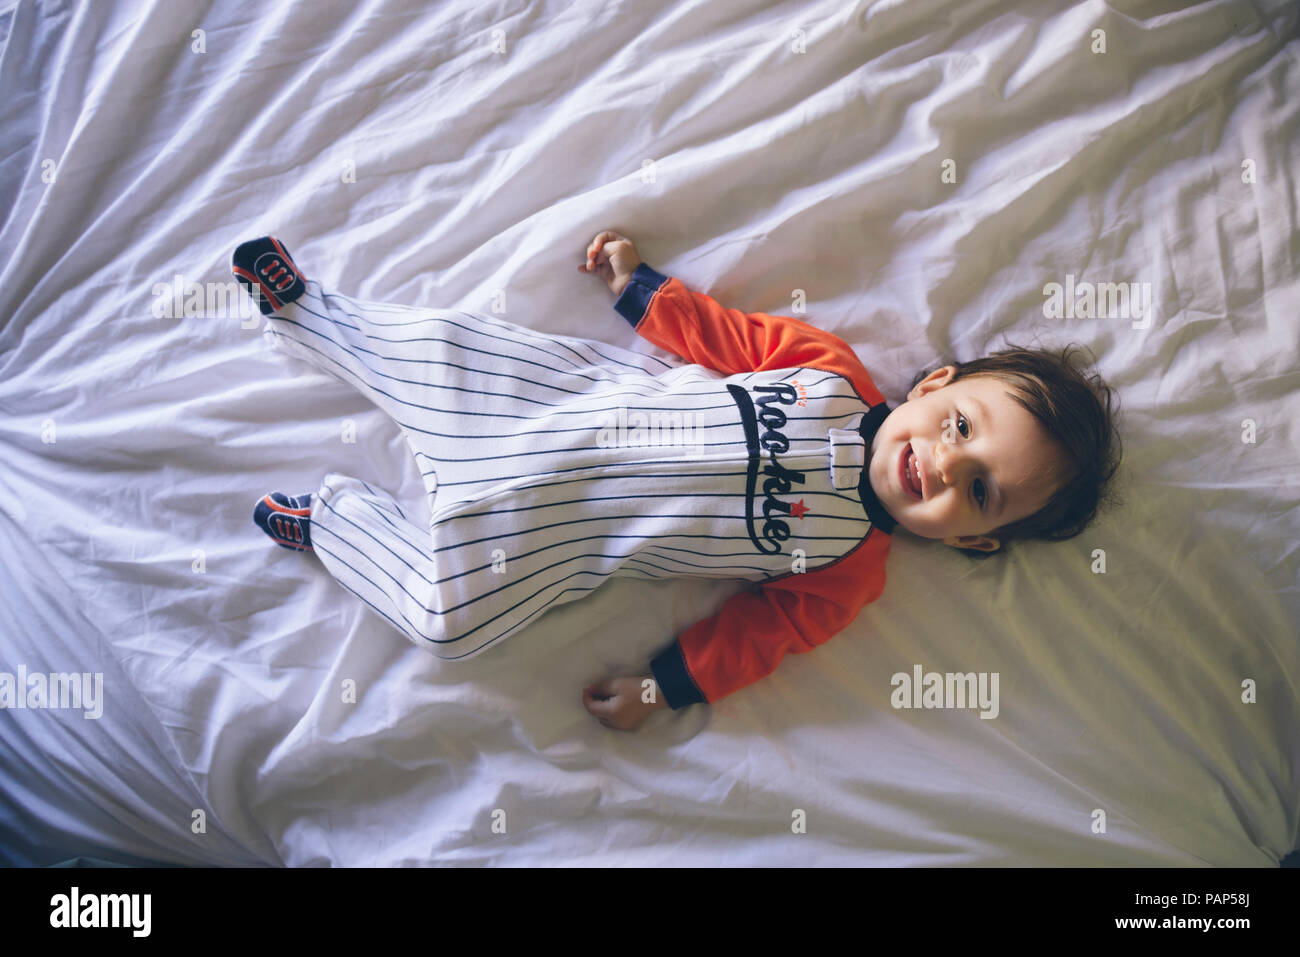 Portrait of smiling baby girl wearing jumpsuit lying on bed Banque D'Images